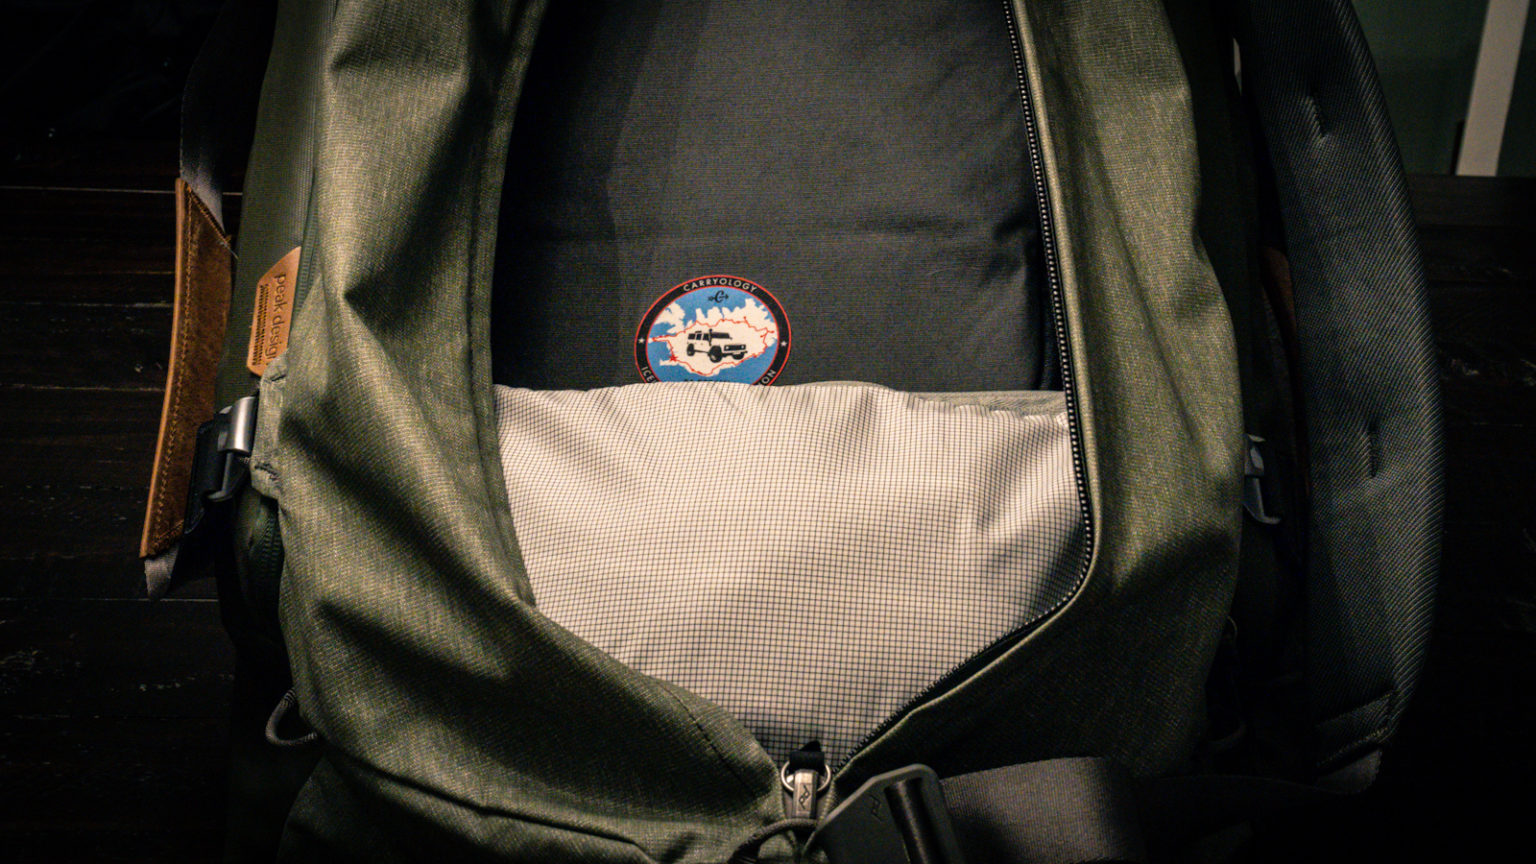 Travel Better with Peak Design's New and Improved Collection - Carryology